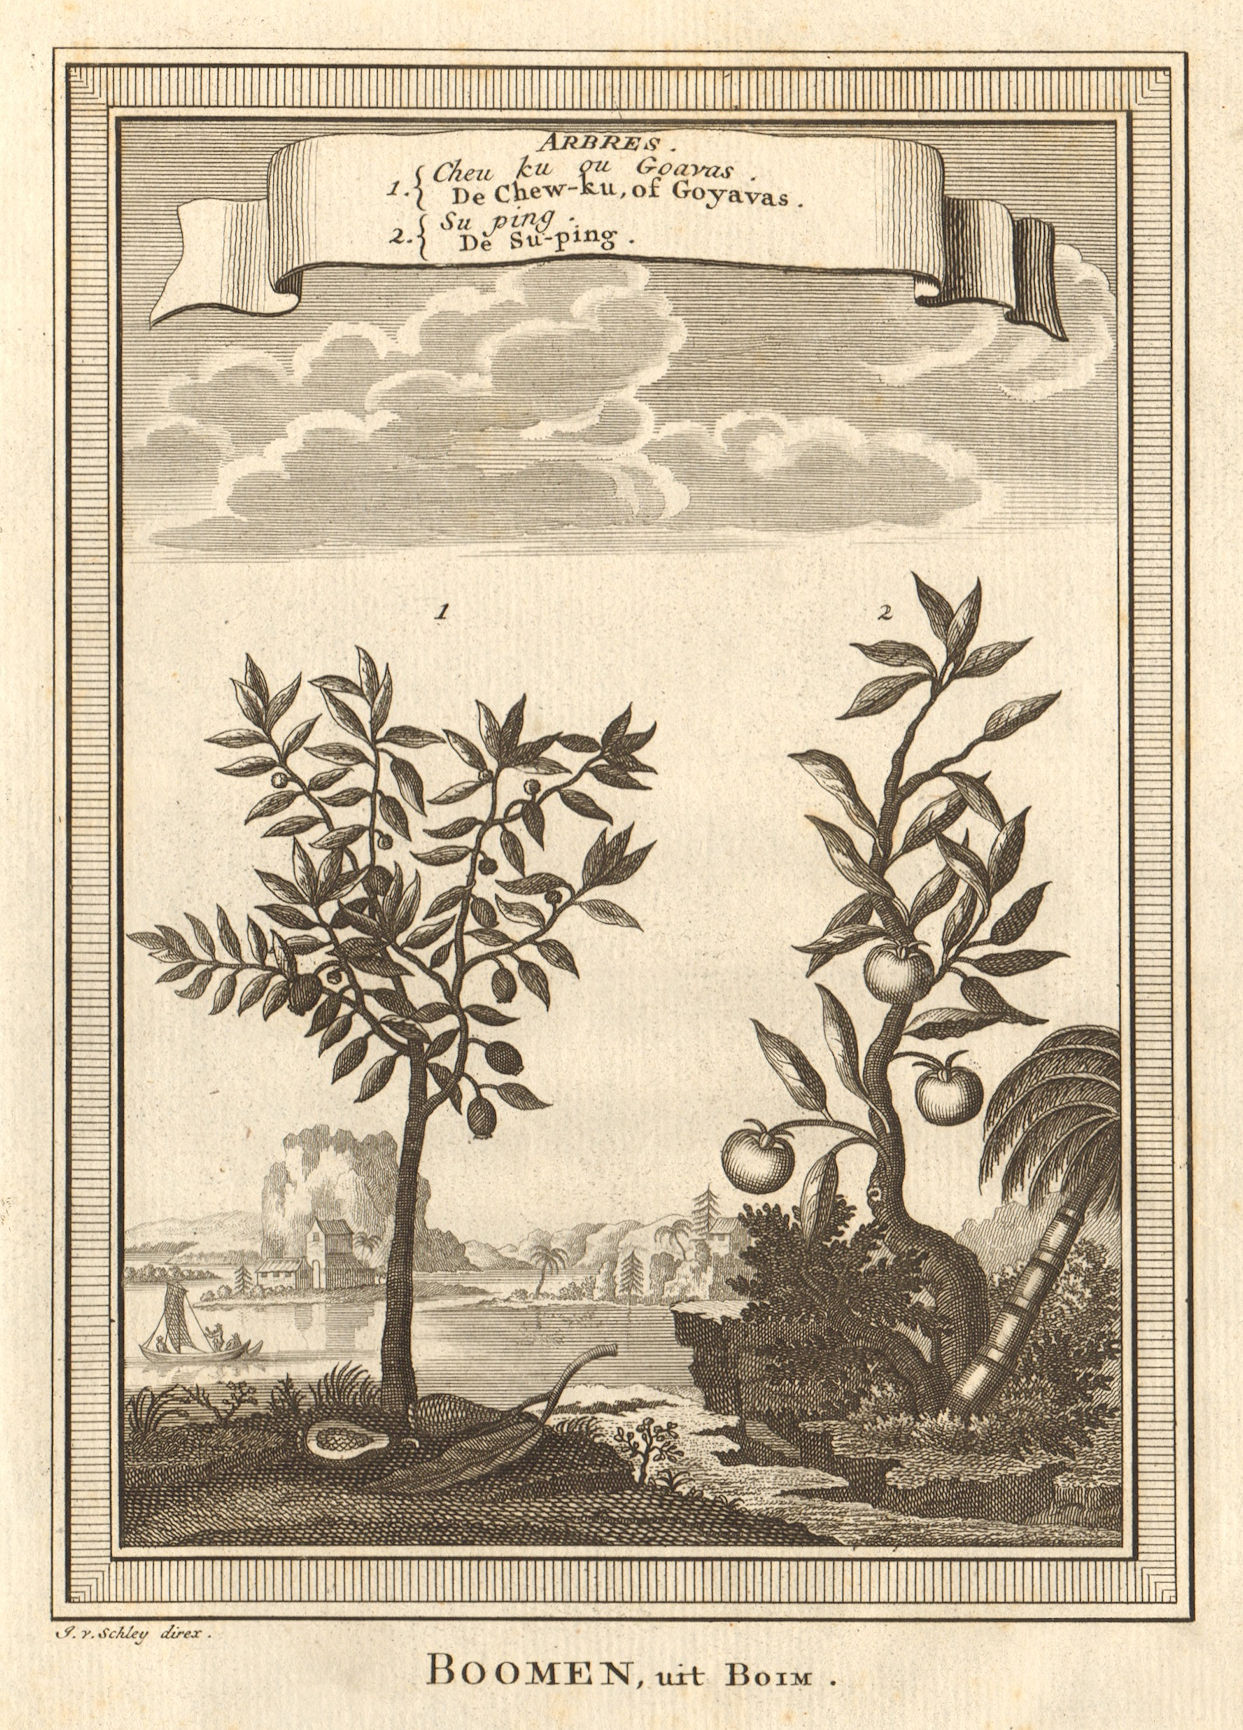 Associate Product 'Arbres; Cheu ku ou Goavas; Suping'. China. Trees; Guava; Suping. SCHLEY 1749